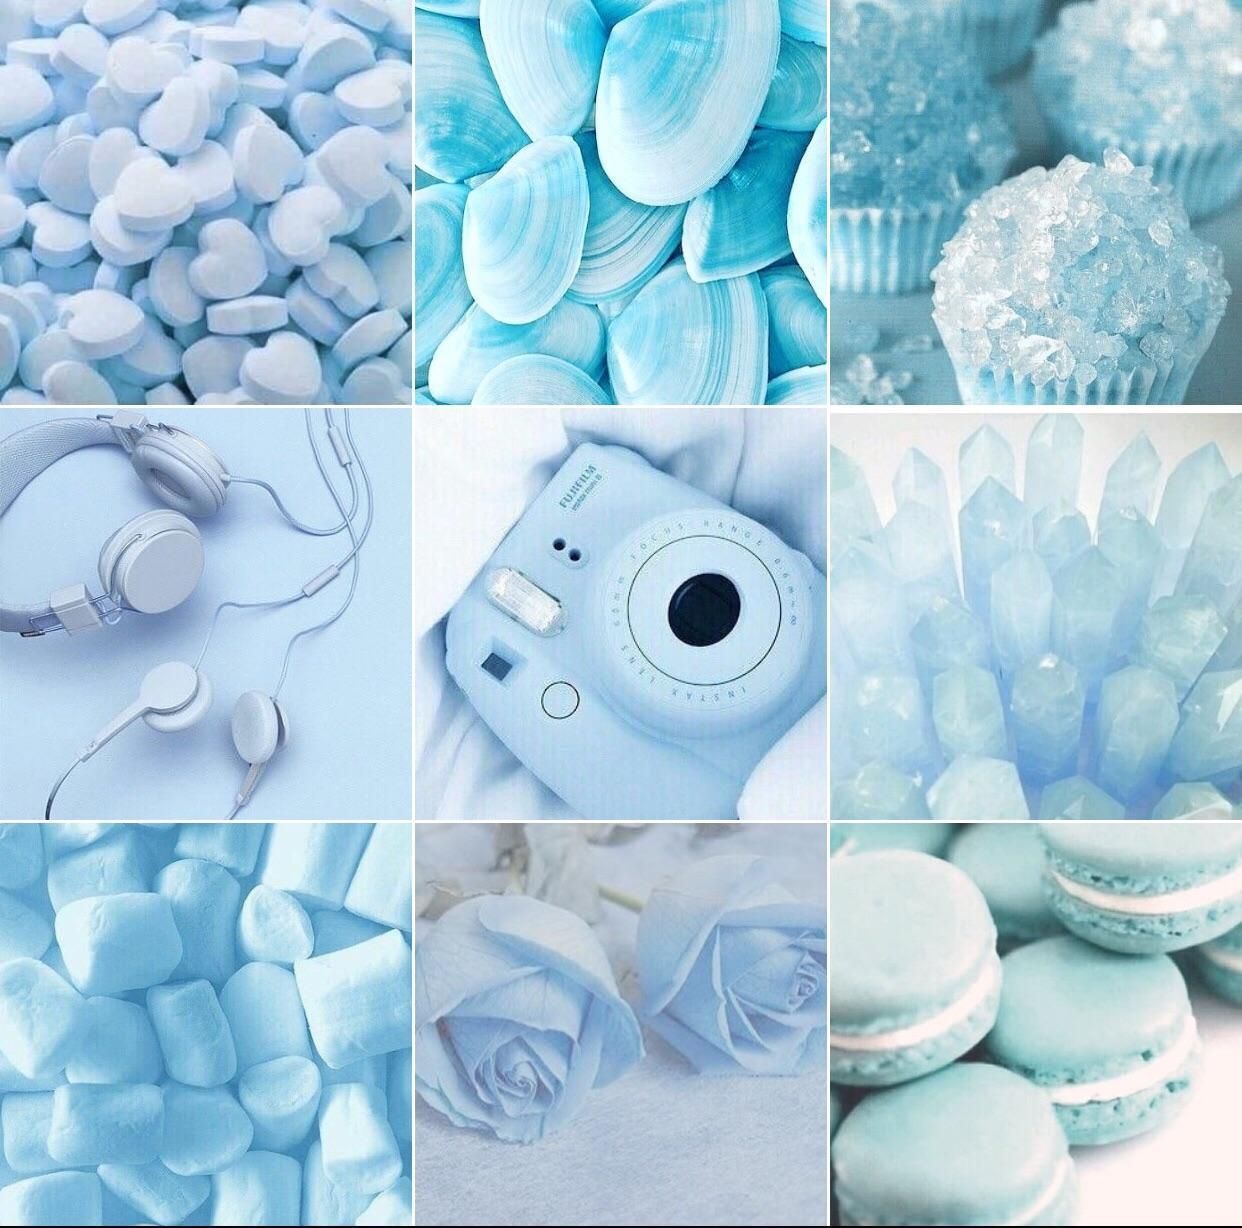 Collage of nine different photos of blue and white objects including ice, macarons, a camera, and headphones. - Cyan